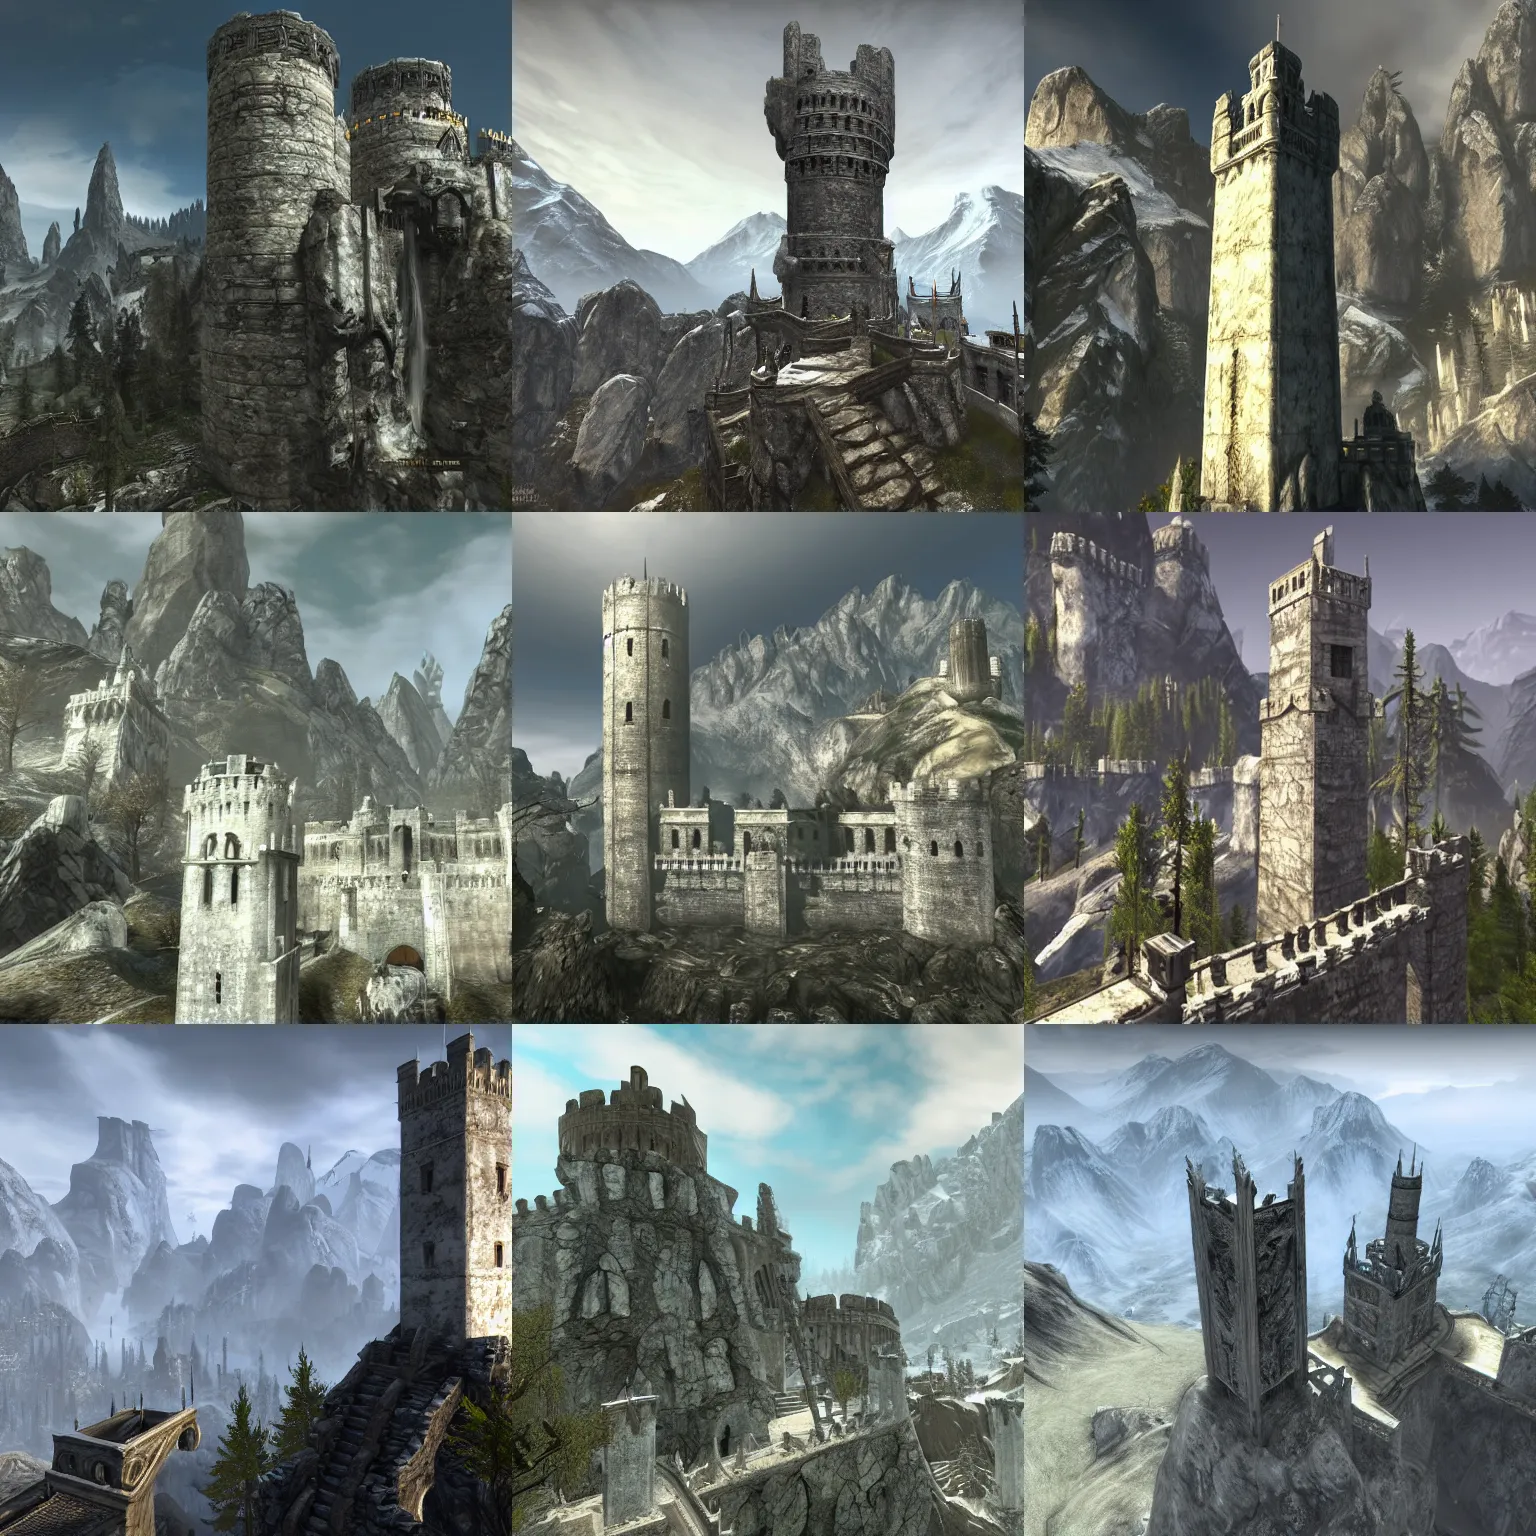 Prompt: an ivory white marble tower peaks up from the mountain valley surrounded by the walled city in the style of Skyrim by Bethesda Game Studio, cyrodiil imperial city